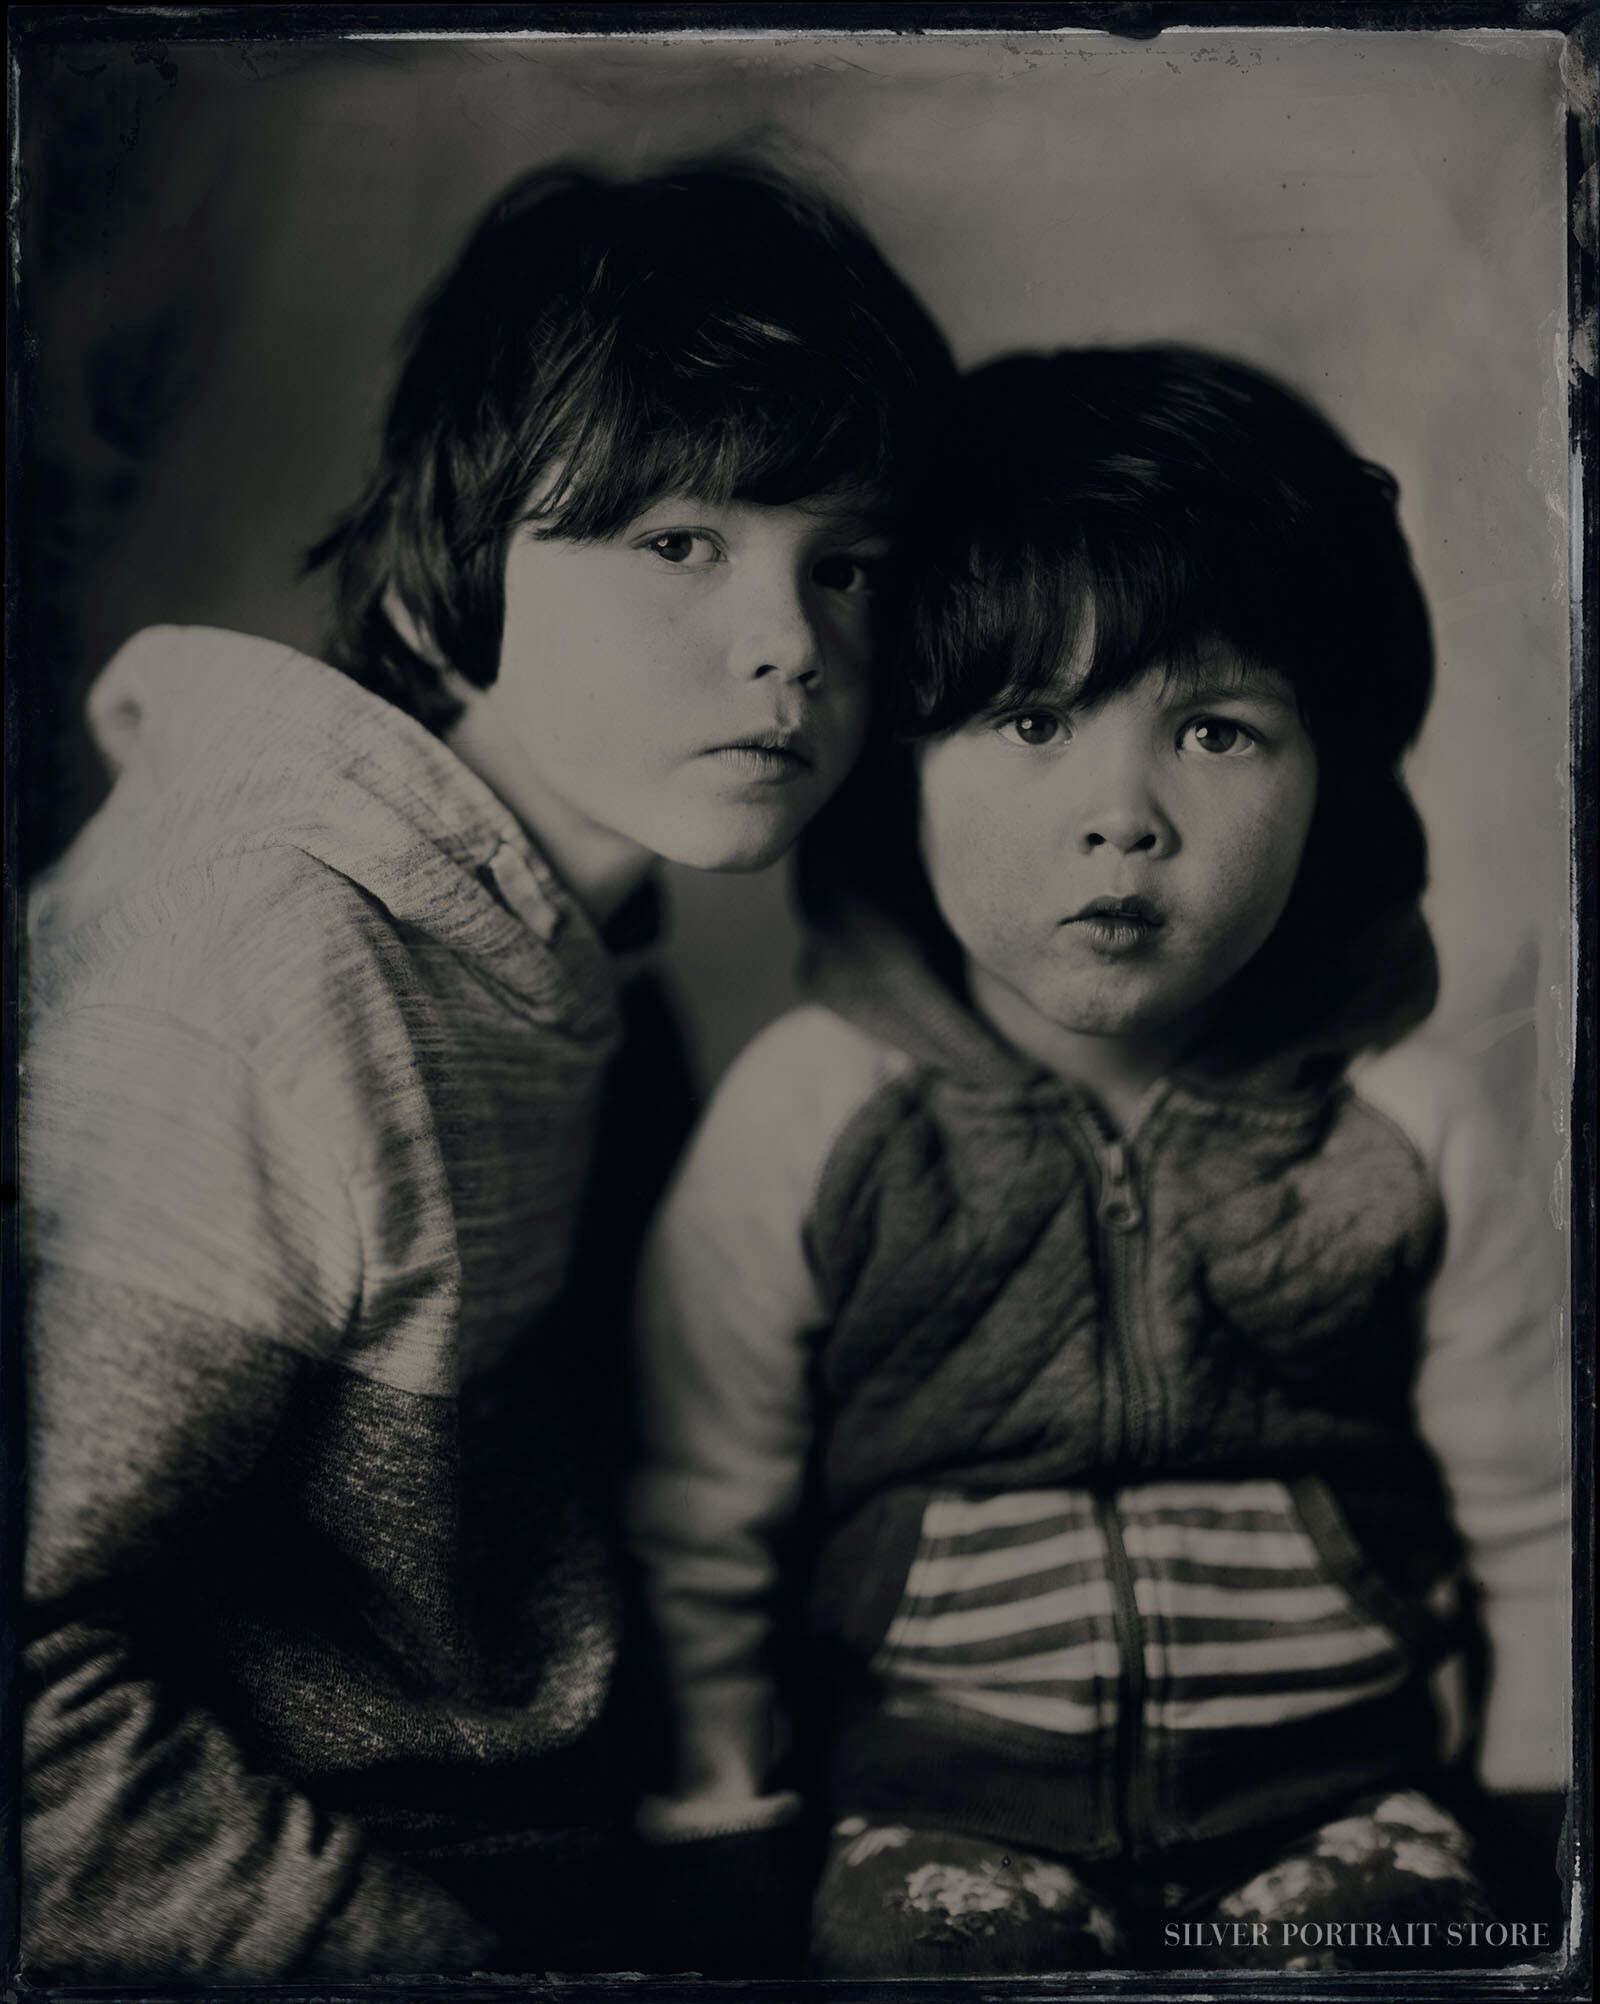 Vigo & Zed-Silver Portrait Store-Scan from Wet plate collodion-Tintype 20 x 25 cm.